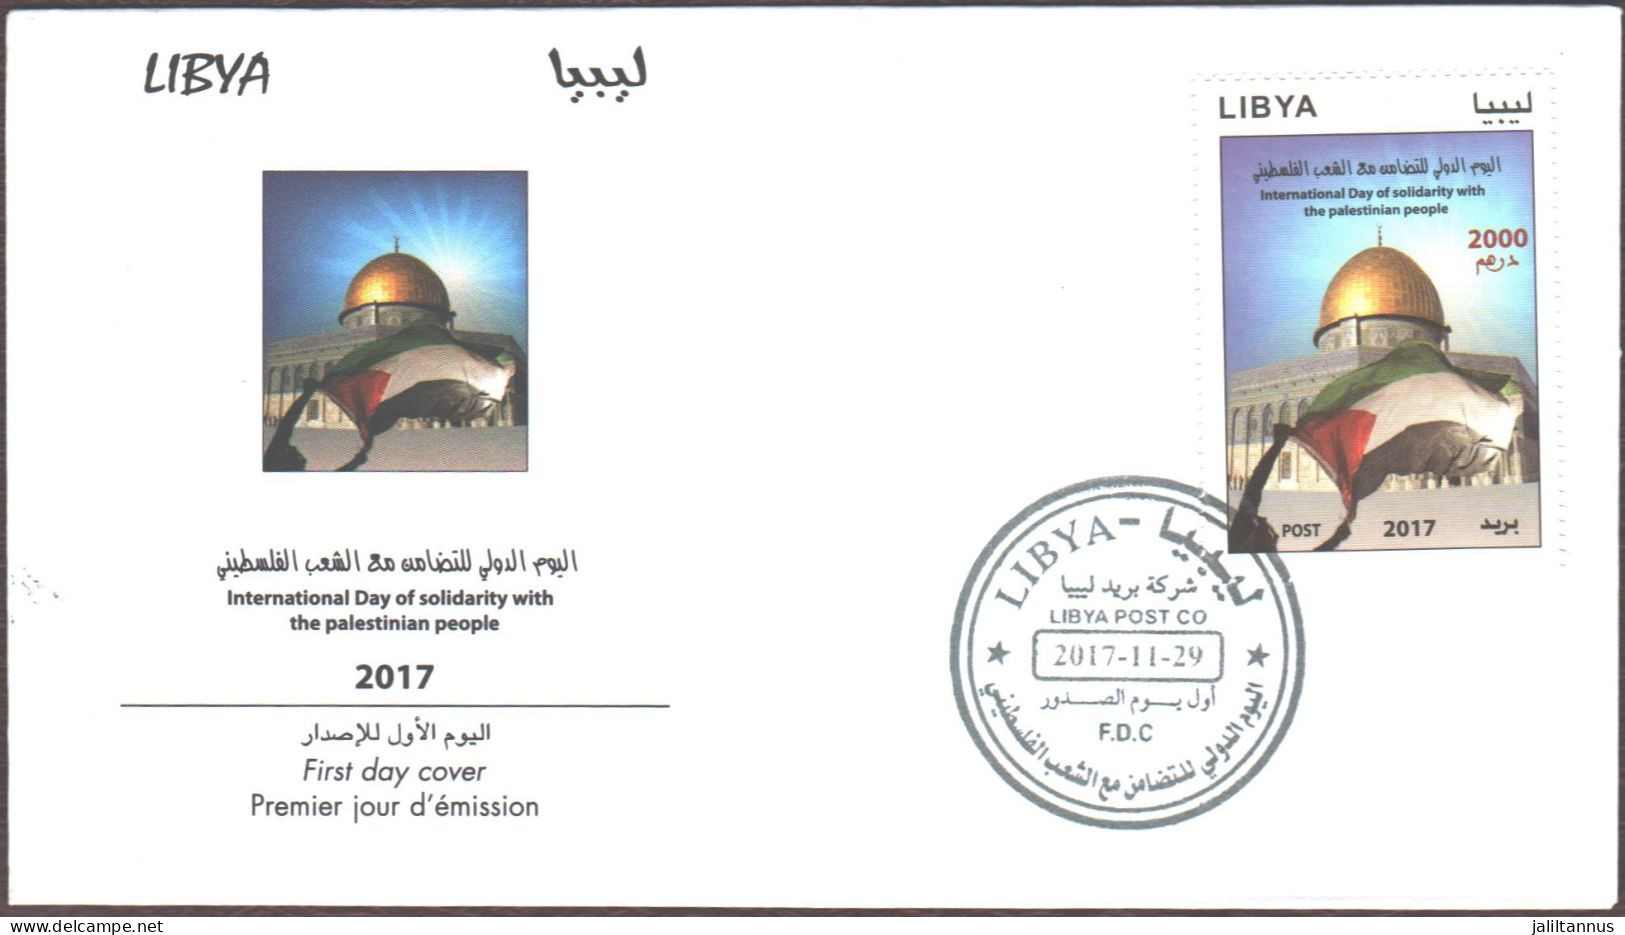 FDC  - LIBYAN (PALESTINE) THE INTERNATIONAL DAY OF SOLIDARITY WITH THE PALESTINIAN PEOPLE 2017 - Kuwait